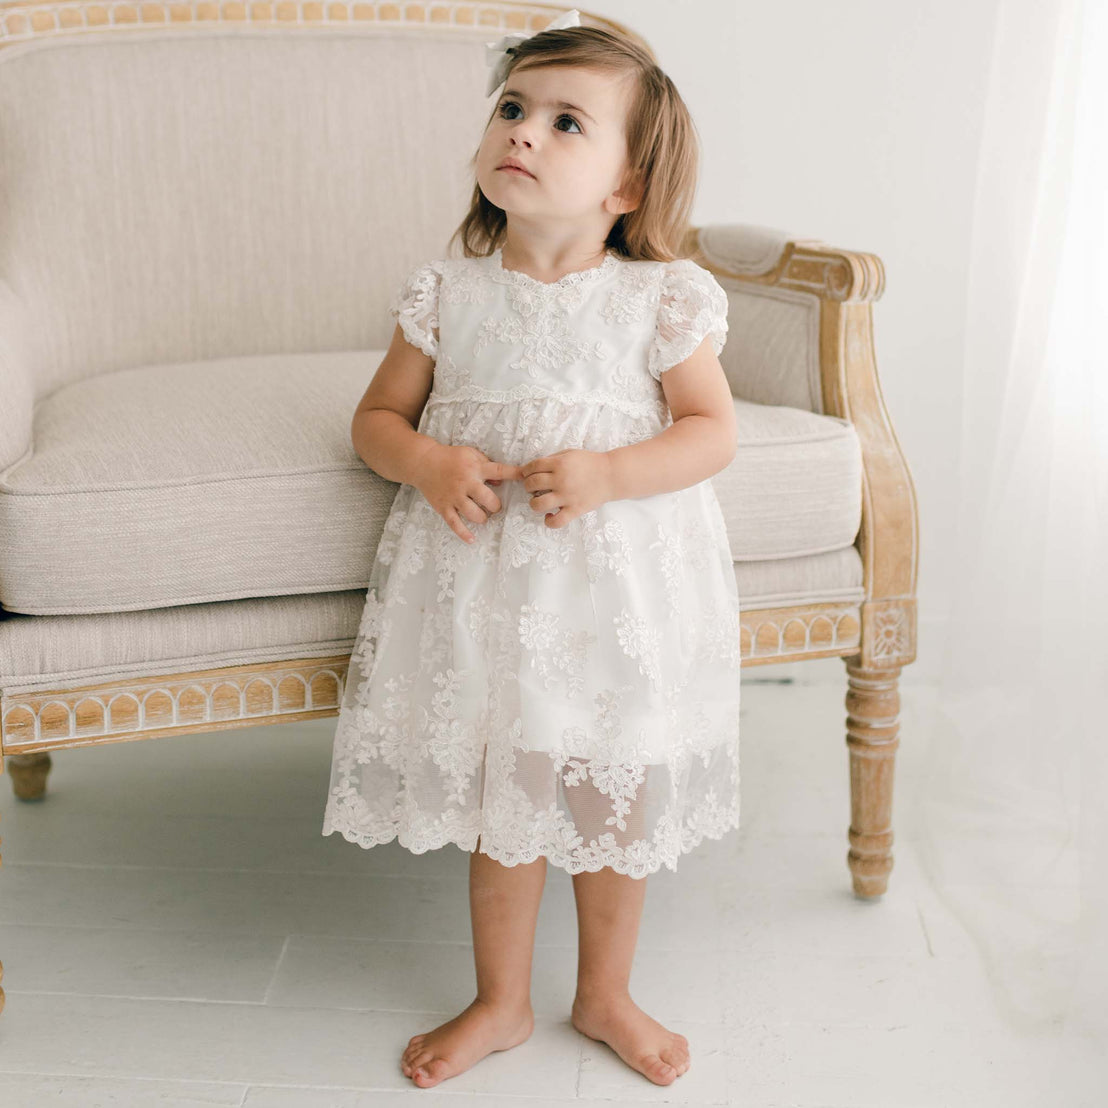 Baby girl standing next to a chair wearing a Penelope silk christening dress.